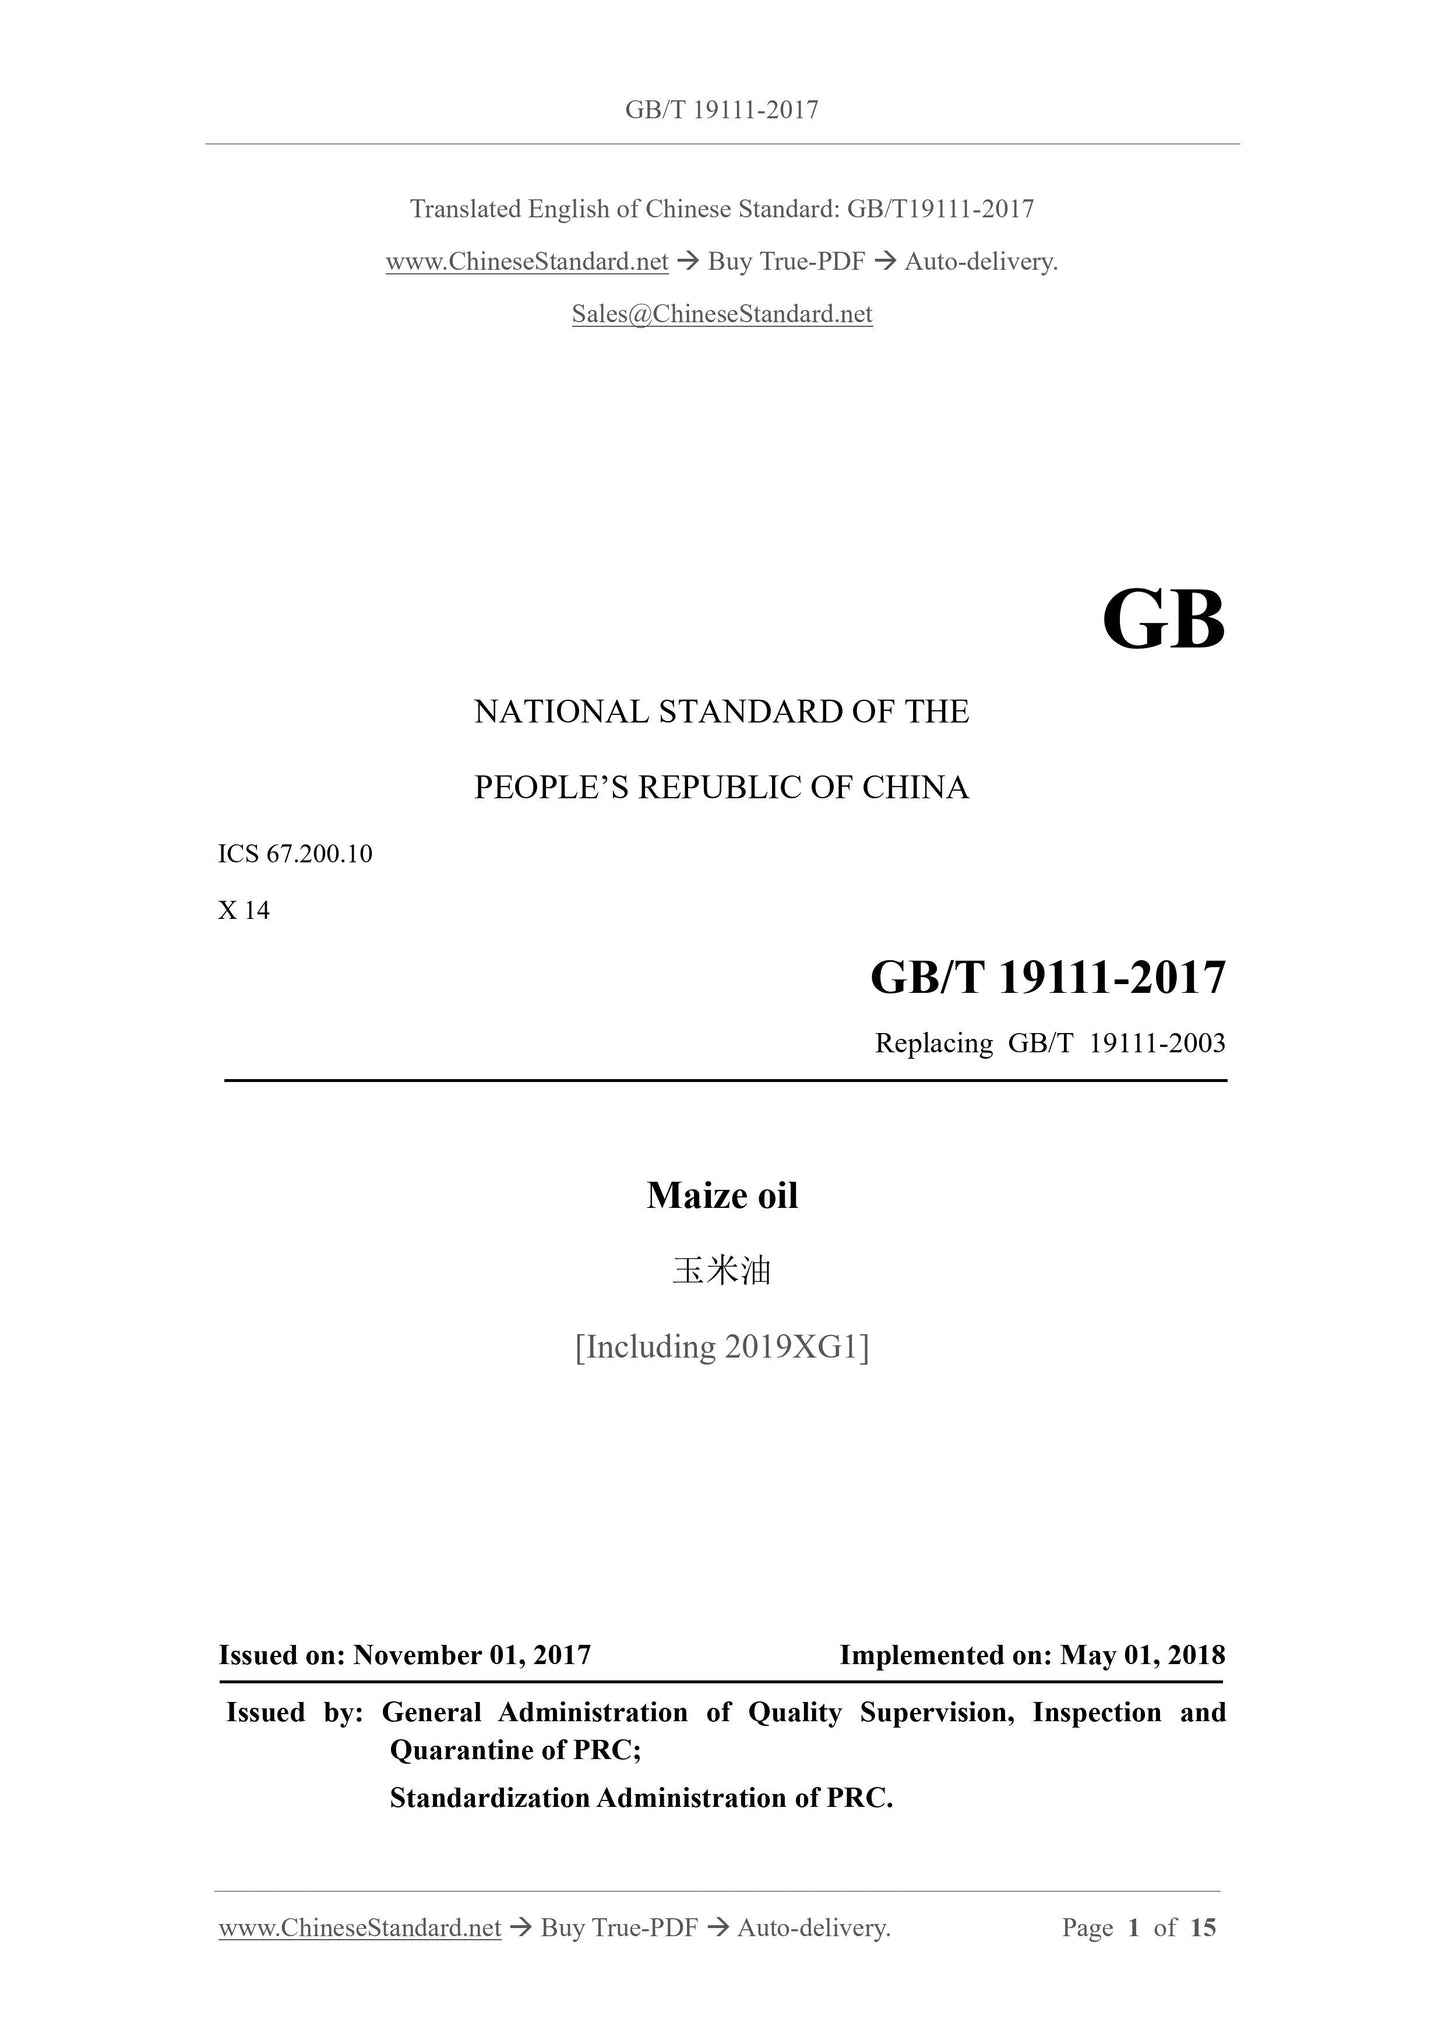 GB/T 19111-2017 Page 1